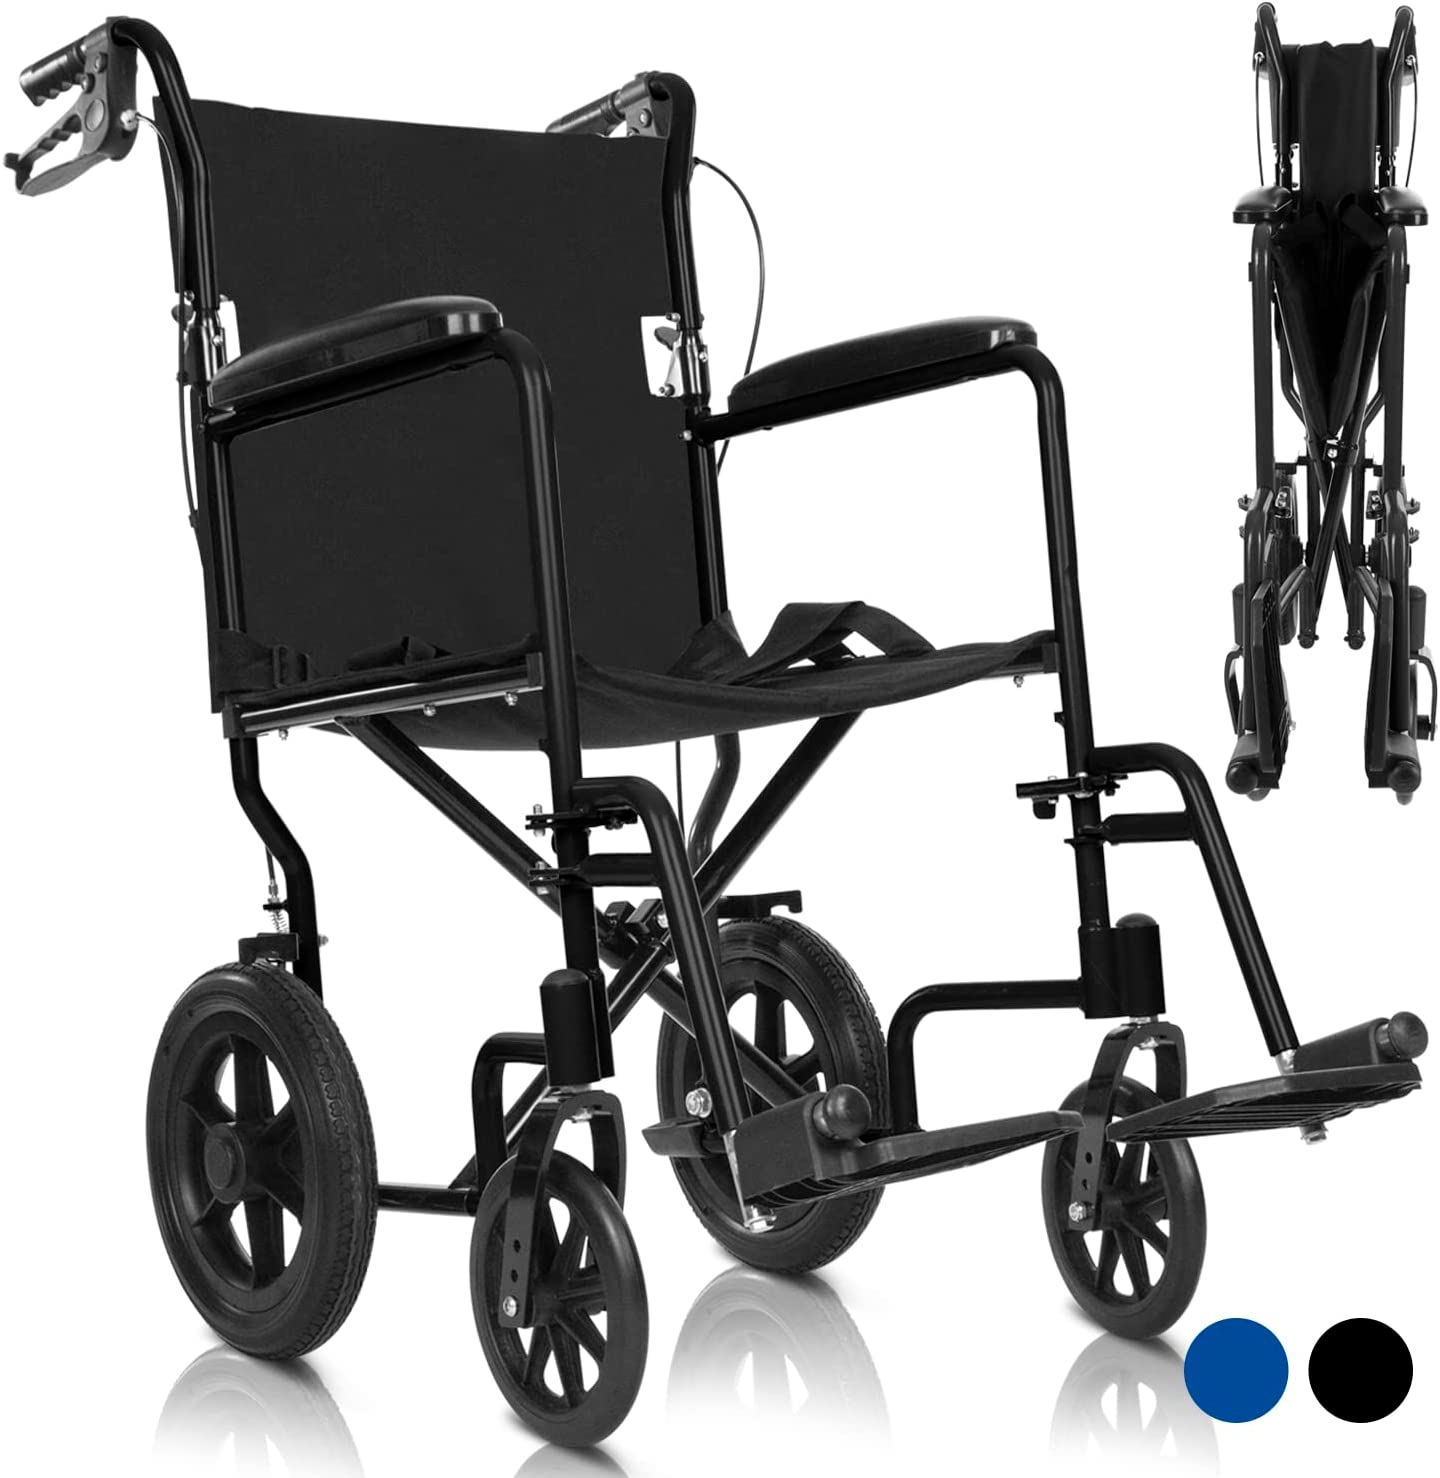 Vive Mobility Adjustable Compact Wheelchair